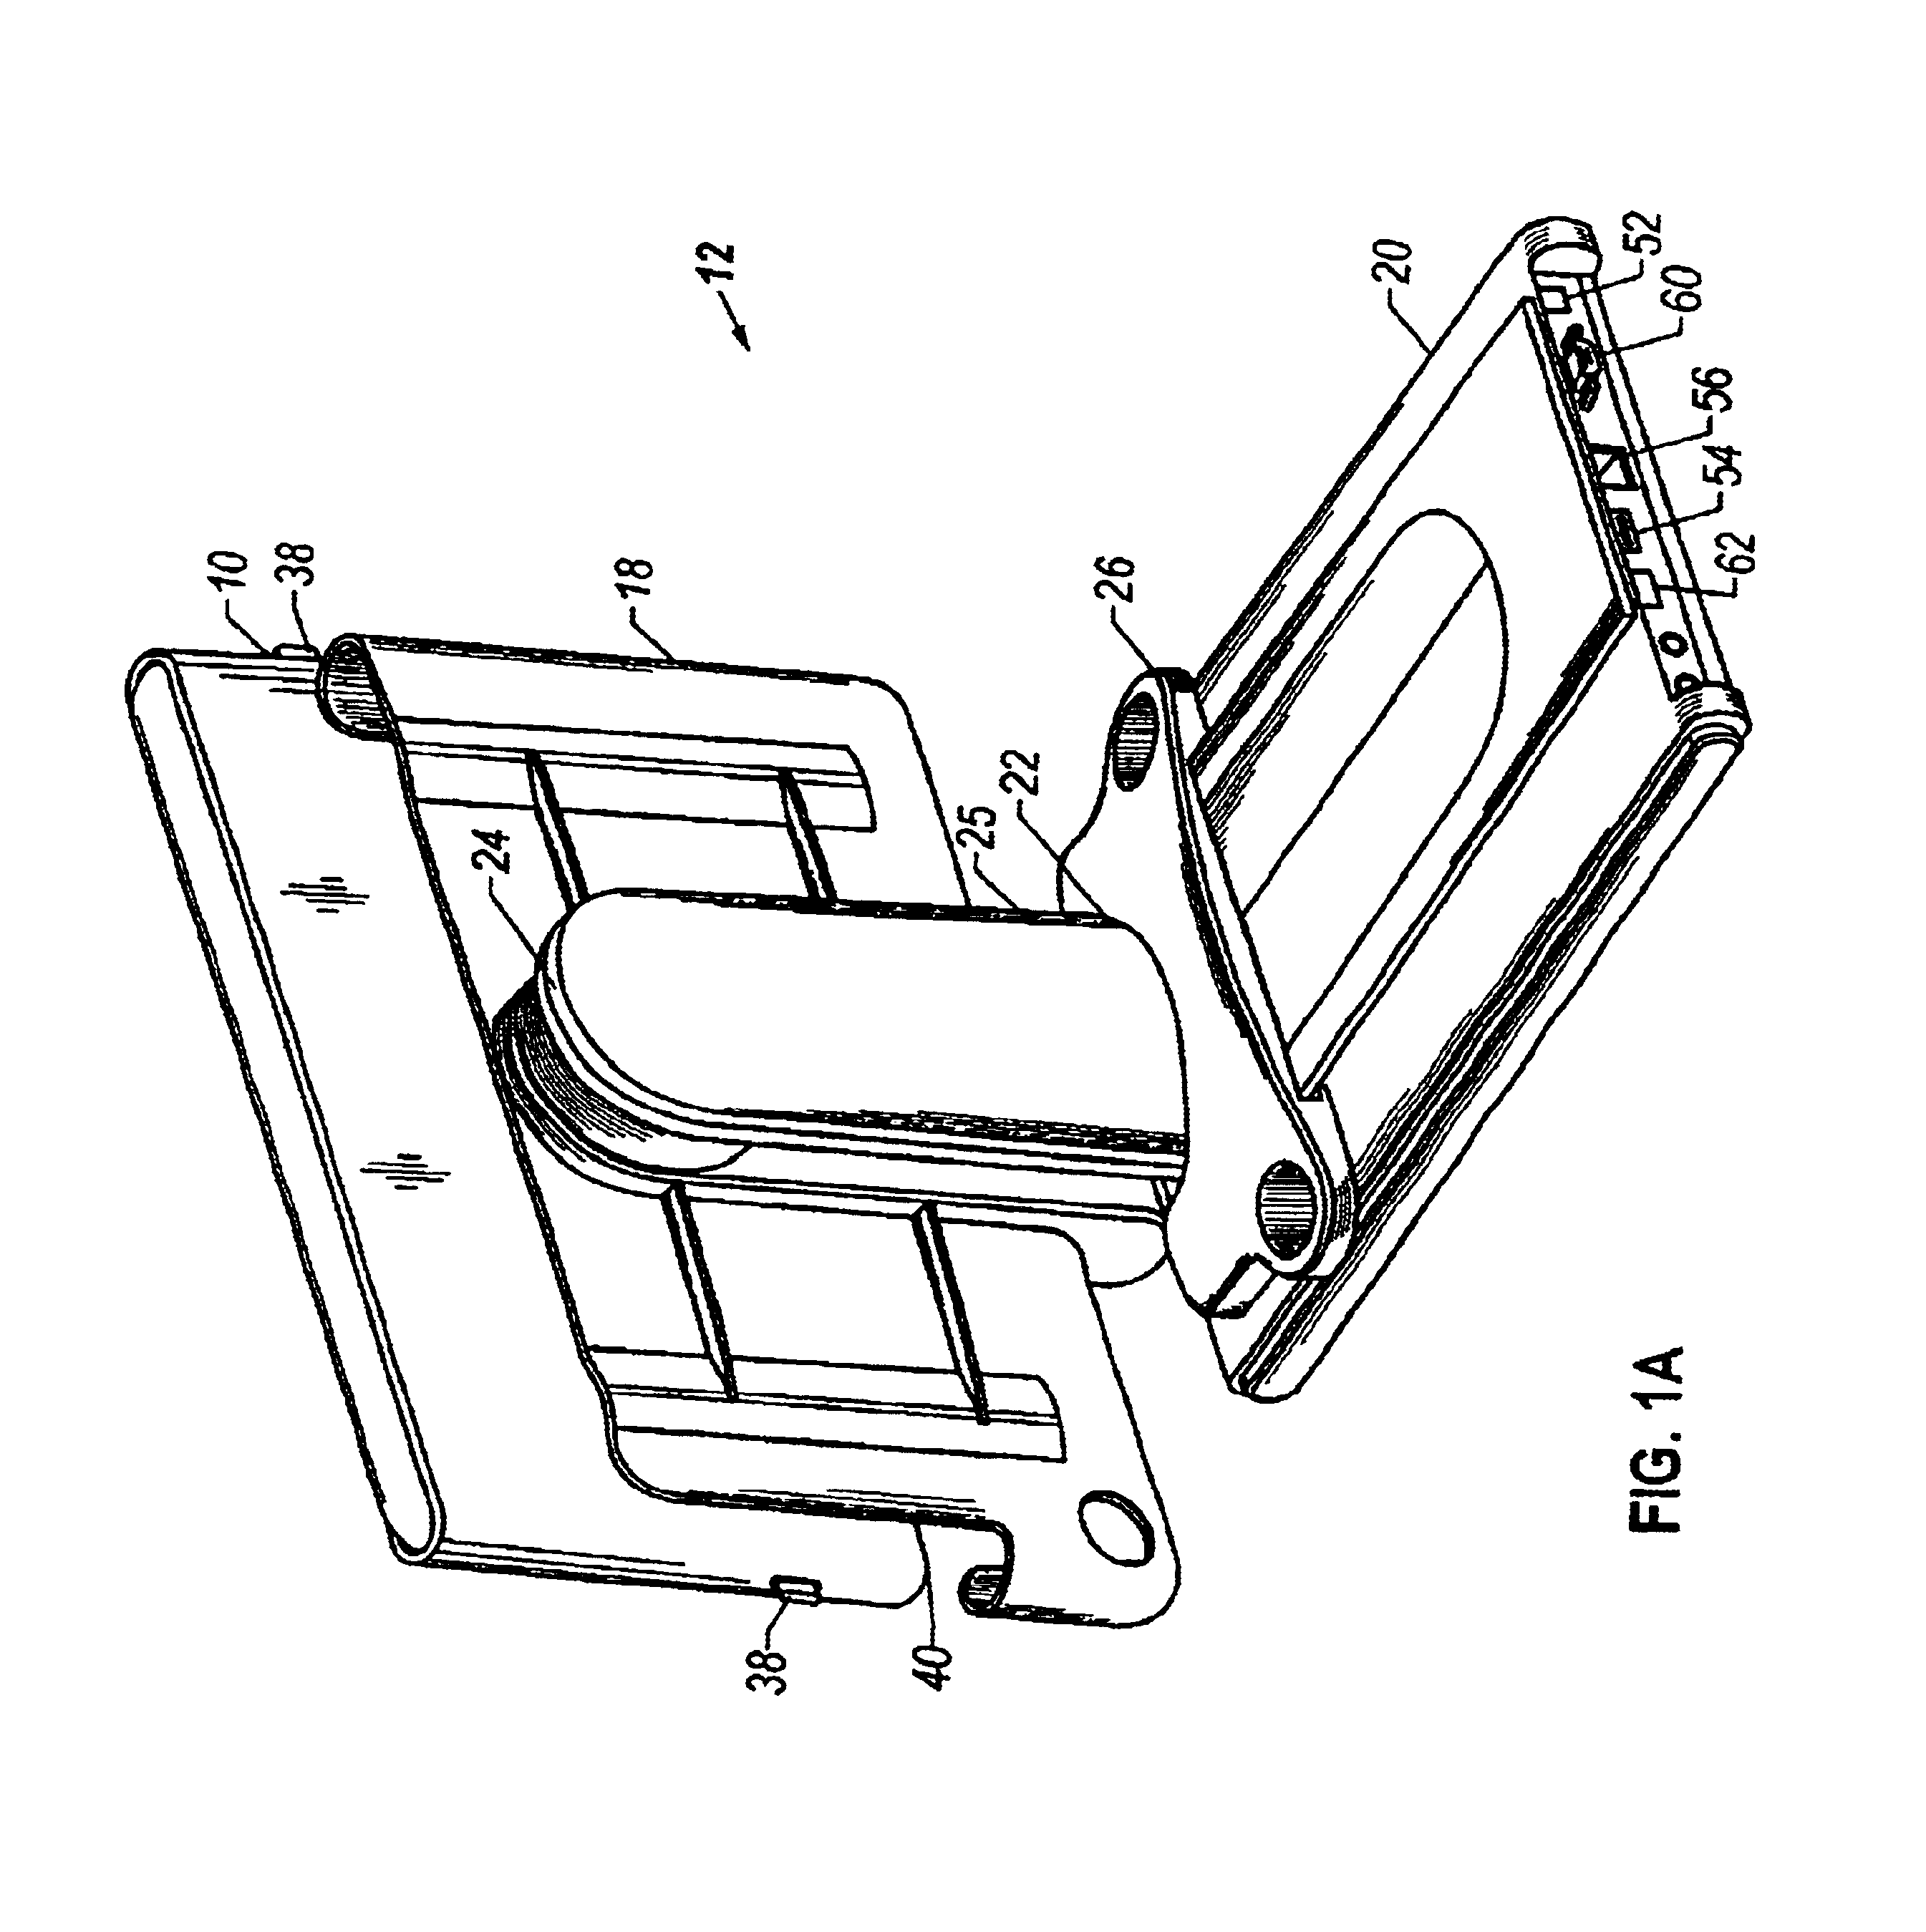 Tablet computing device with three-dimensional docking support